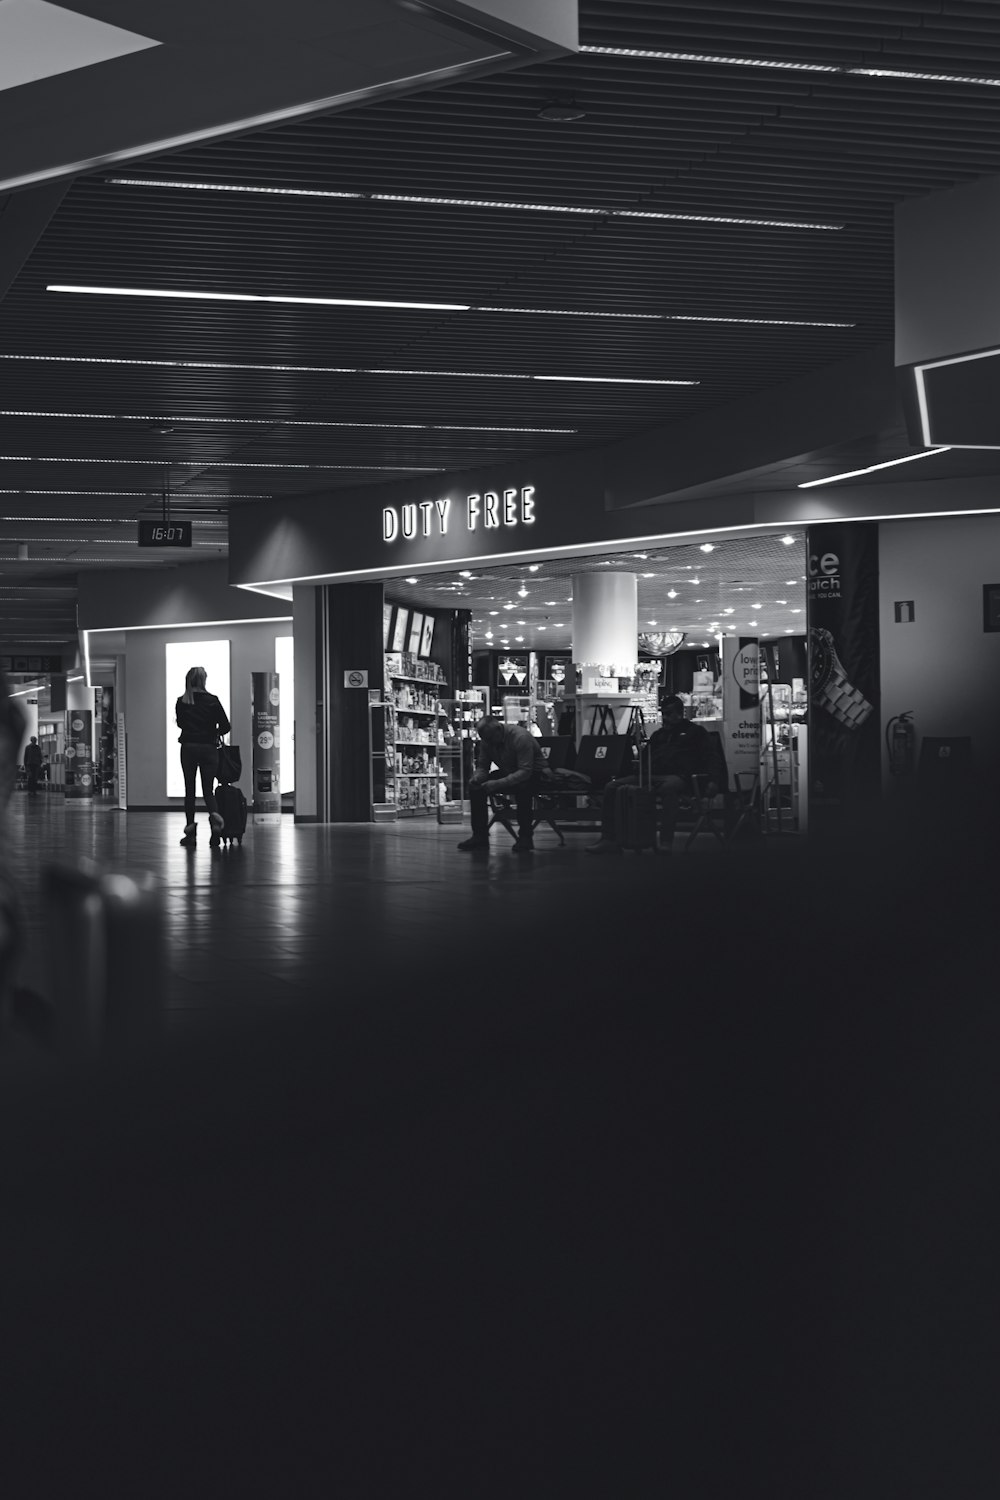 a black and white photo of people walking through an airport